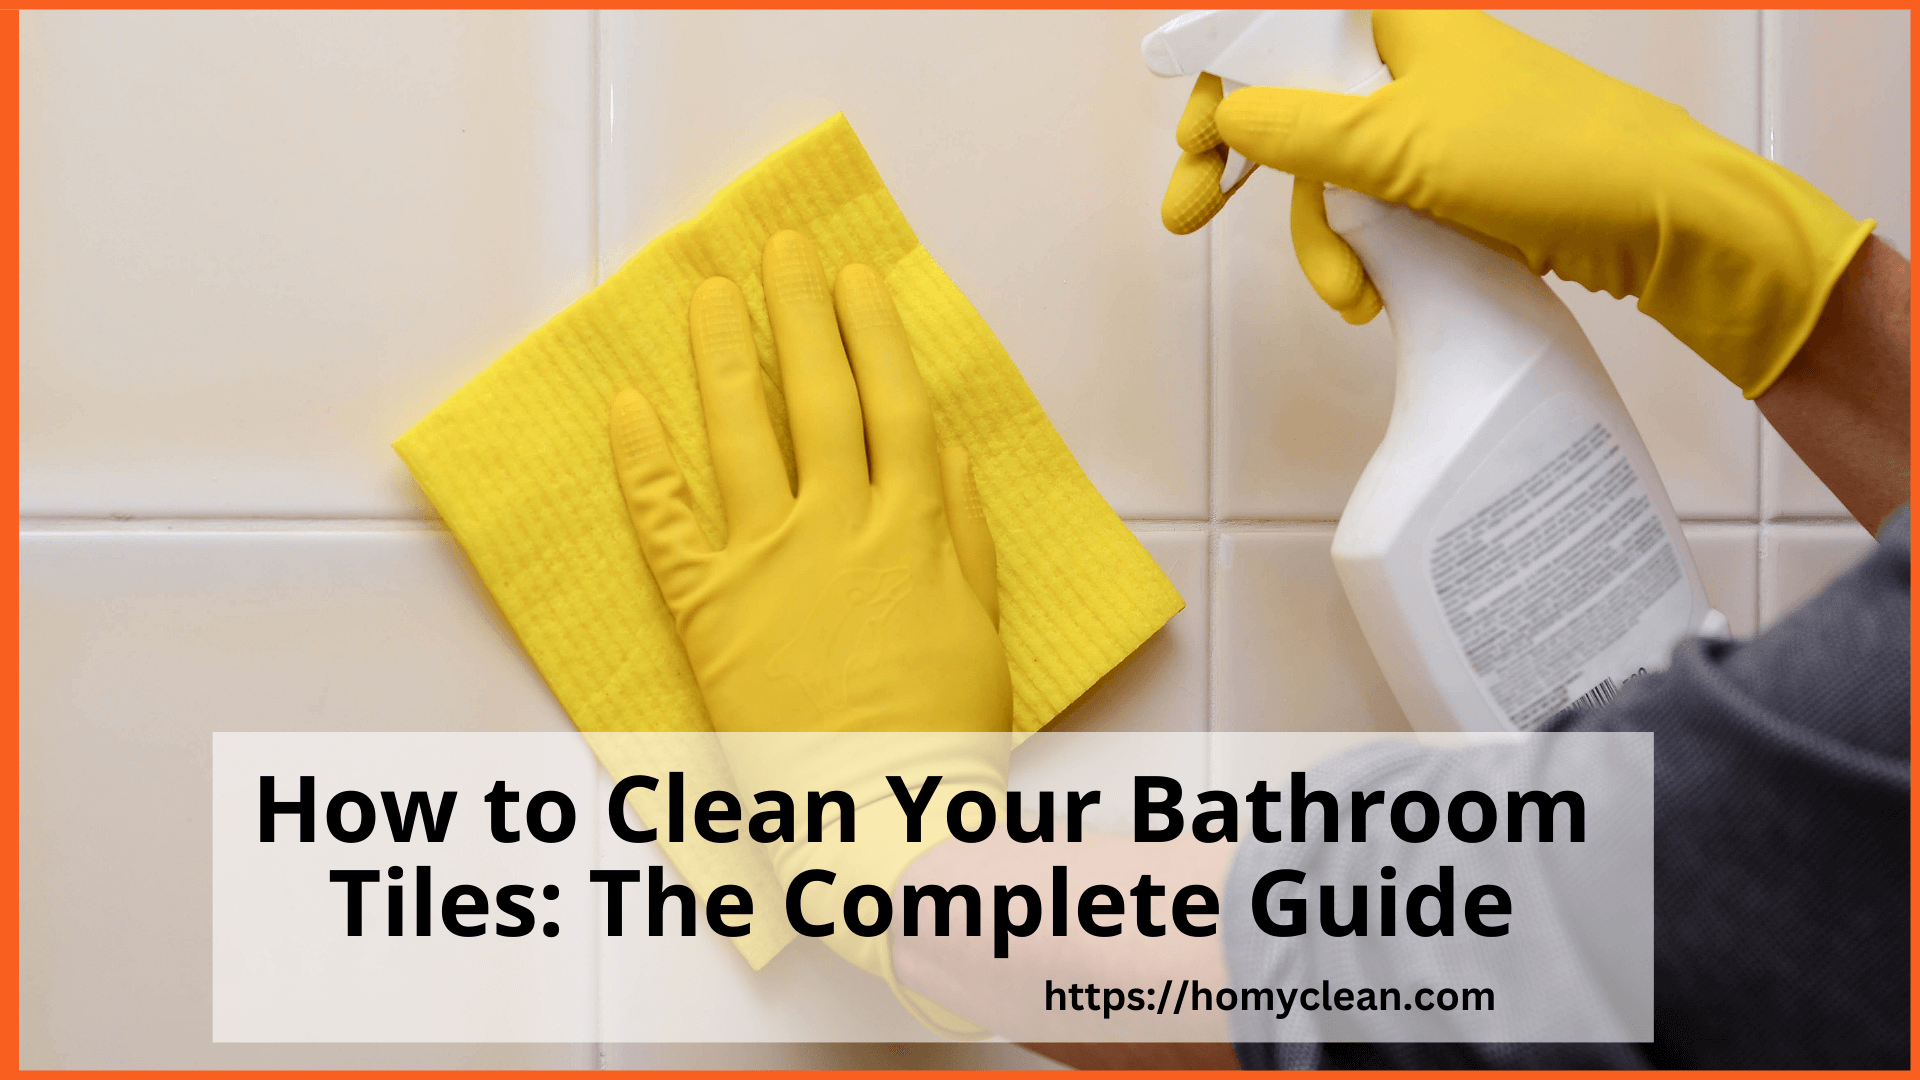 How To Clean Your Bathroom Tiles 3 Complete Guide Tips